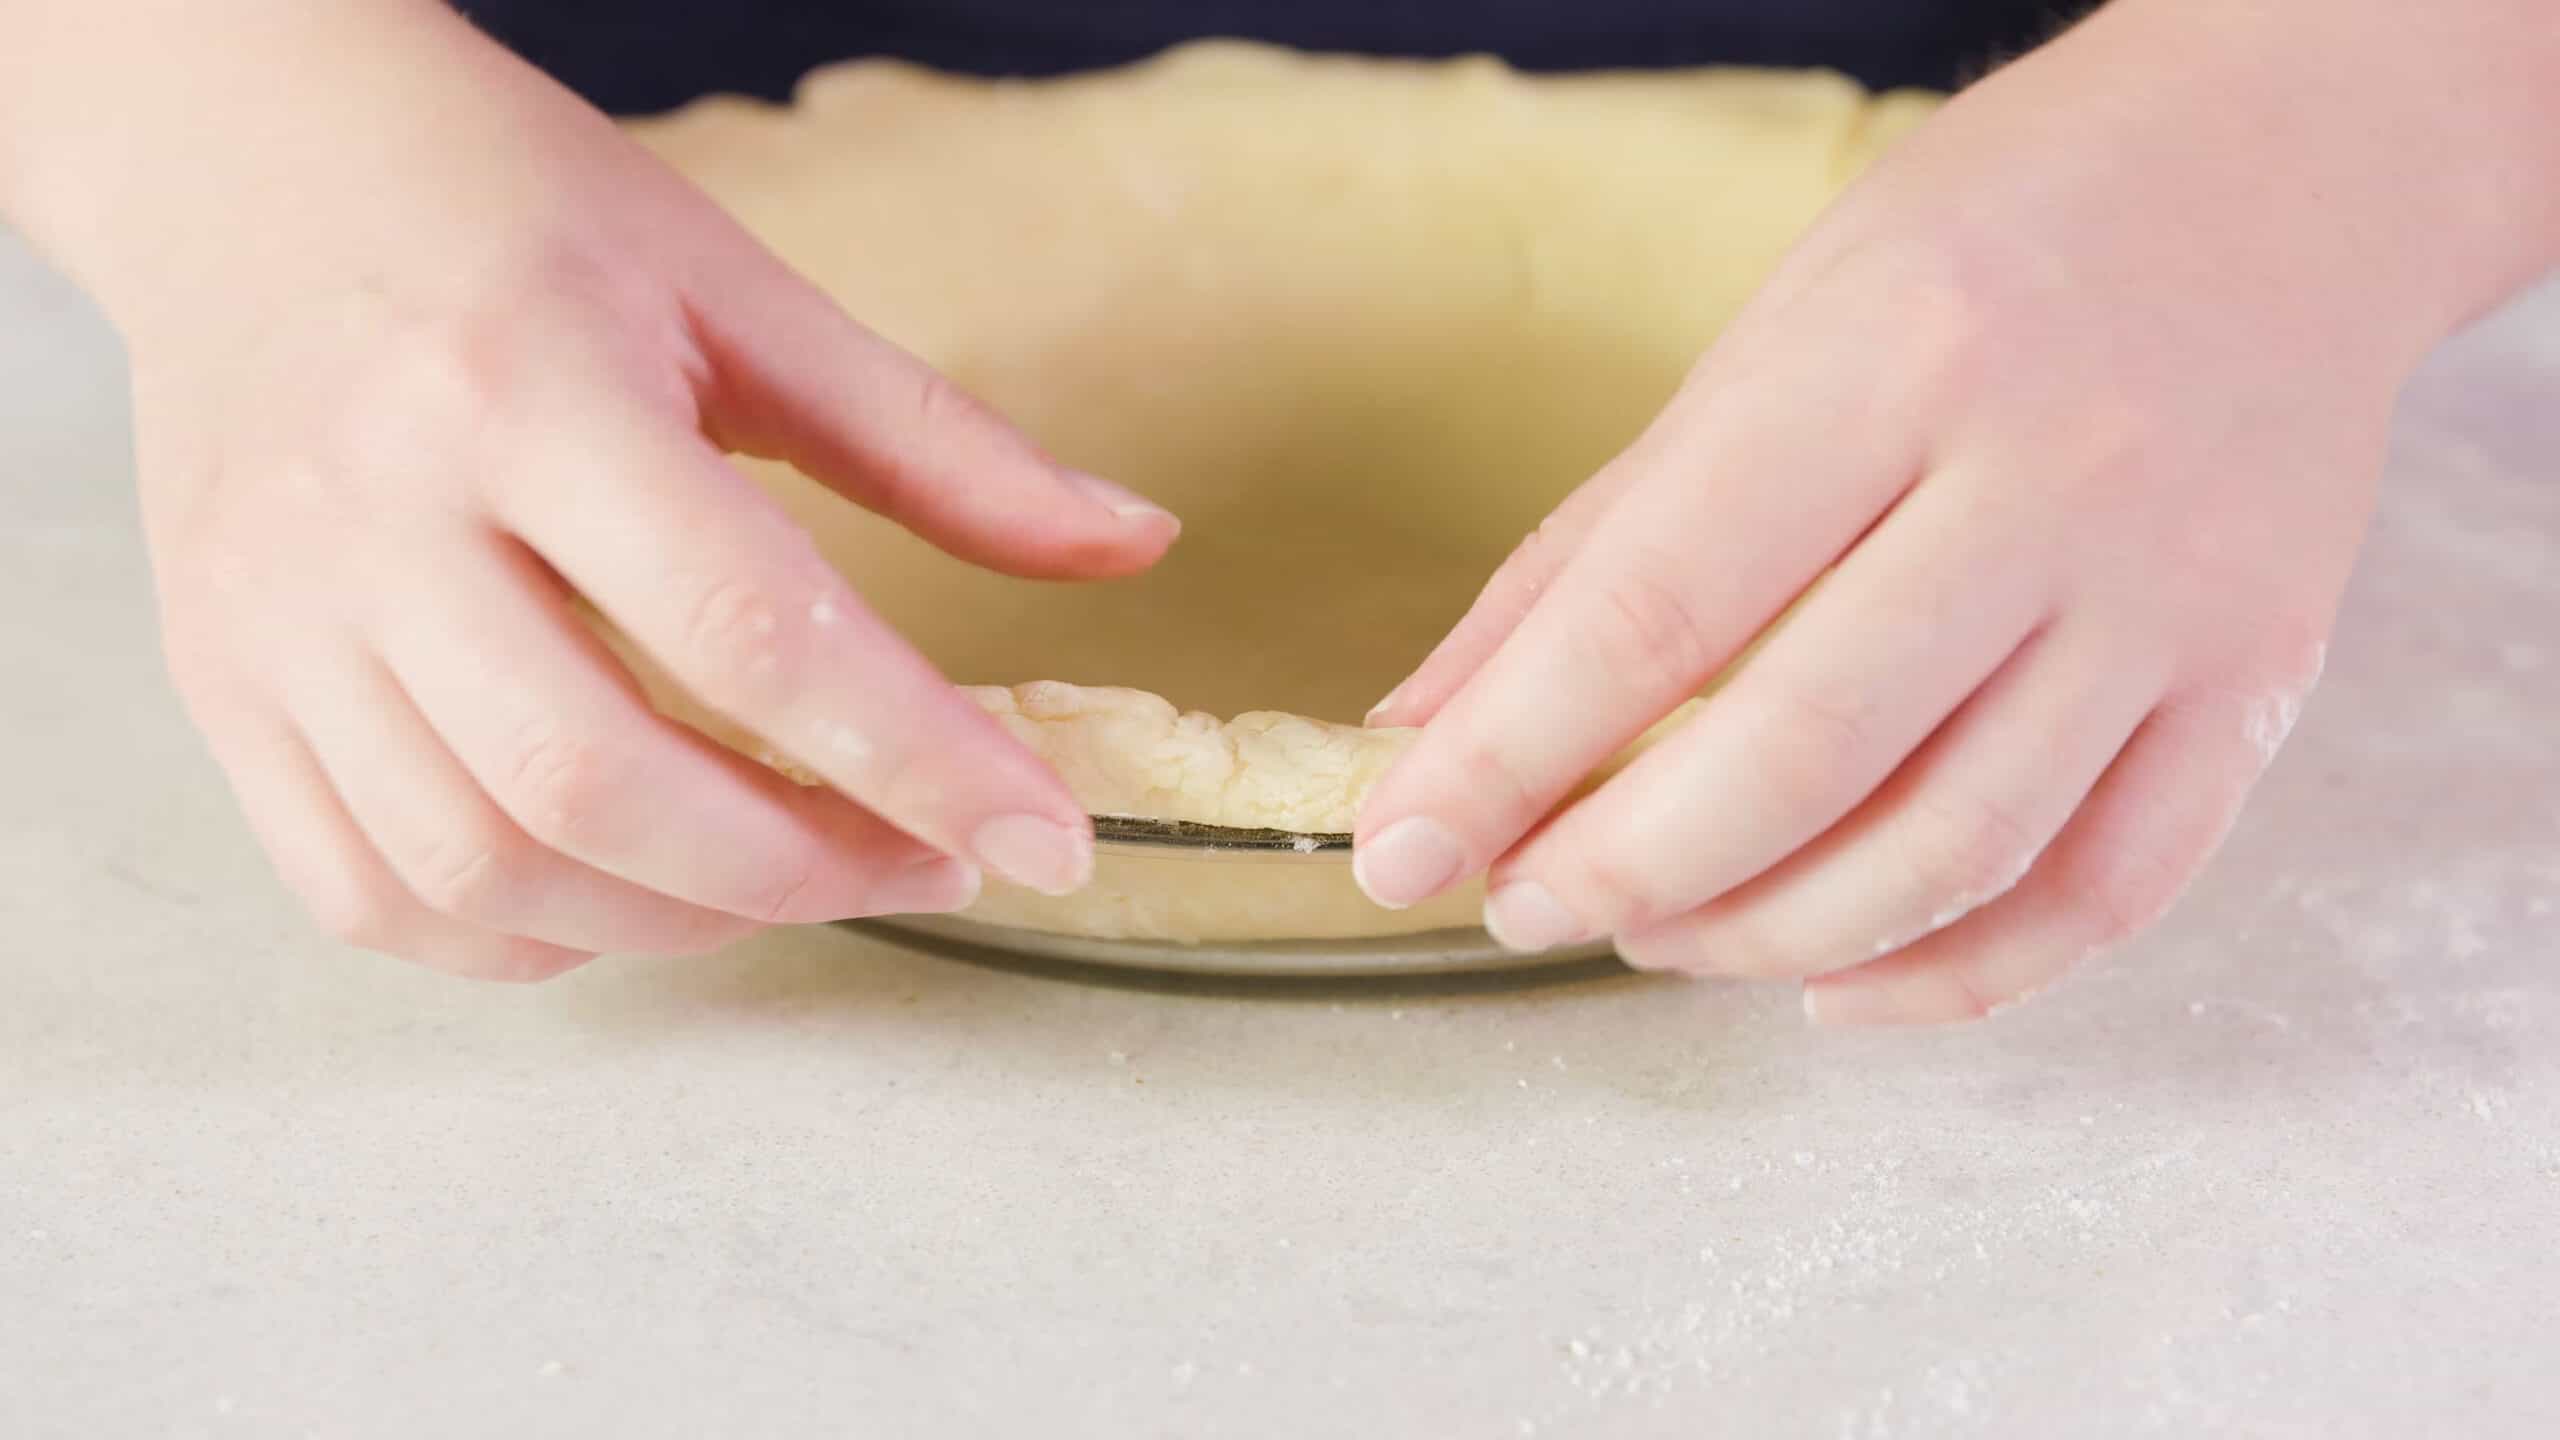 Close-up view of outer edge of clear glass pie plate with the rolled pie crust dough placed with a puckered edge ready for pleating.